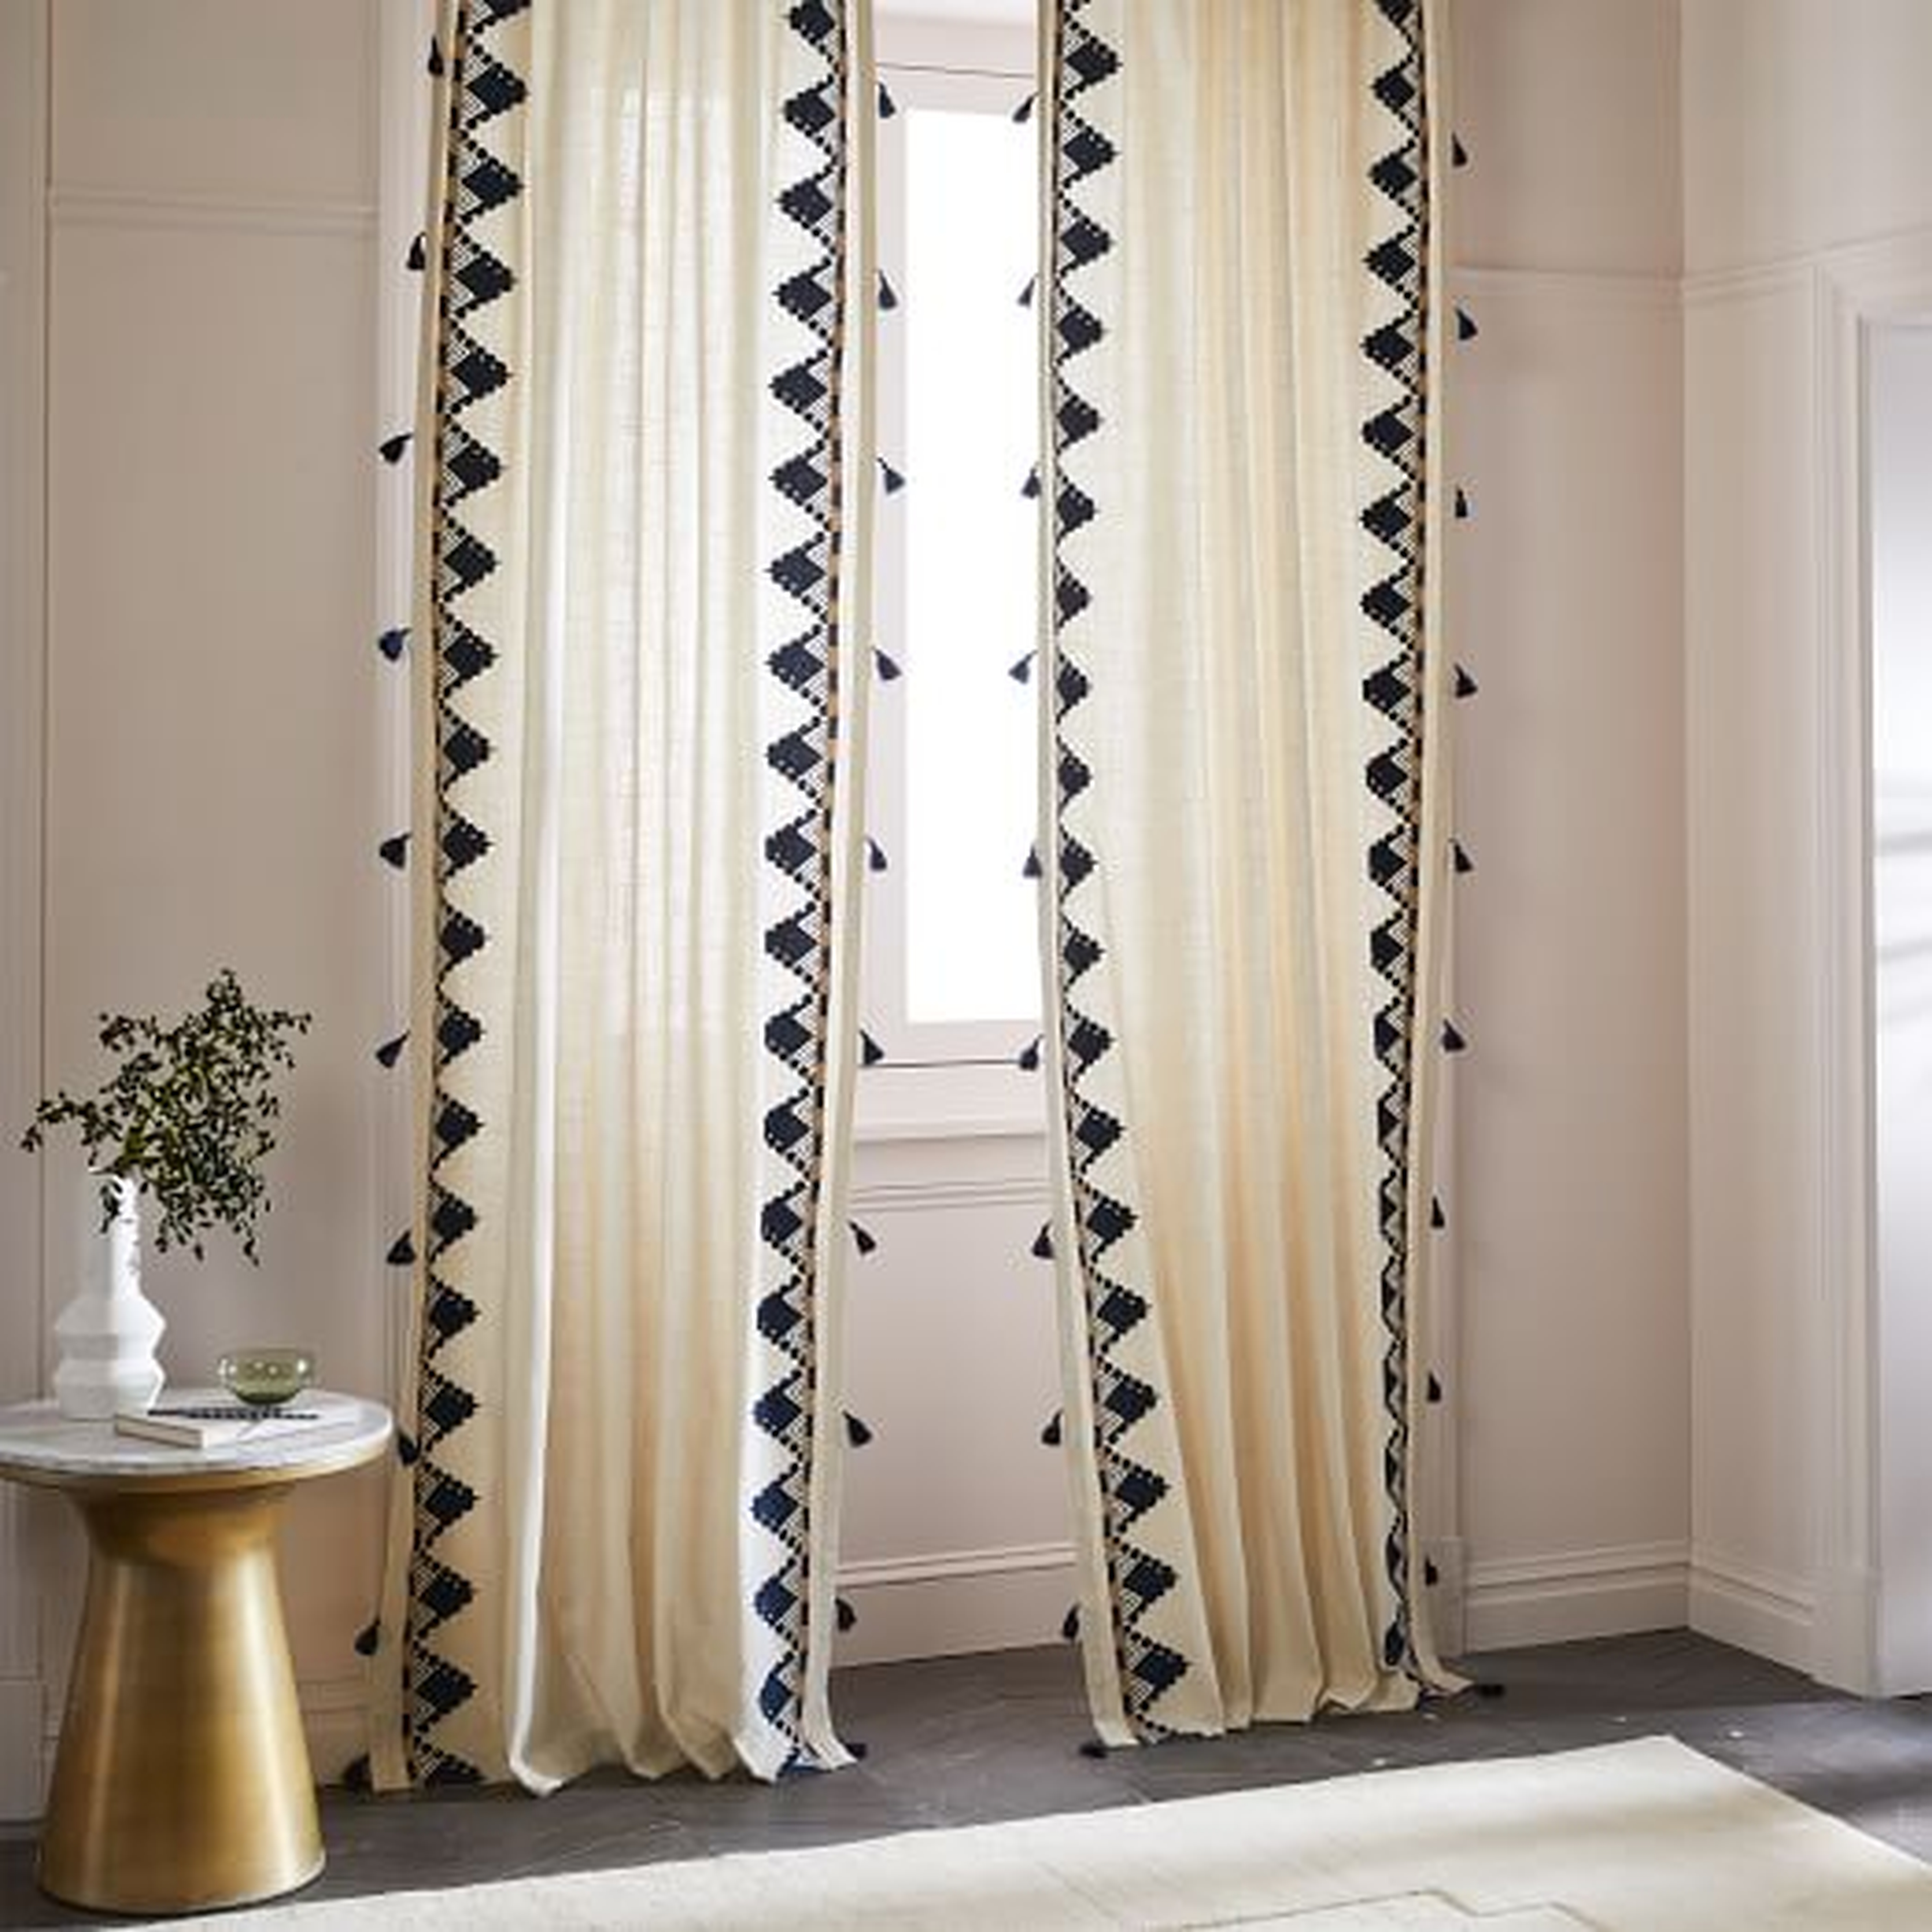 Embroidered Border Curtain - West Elm